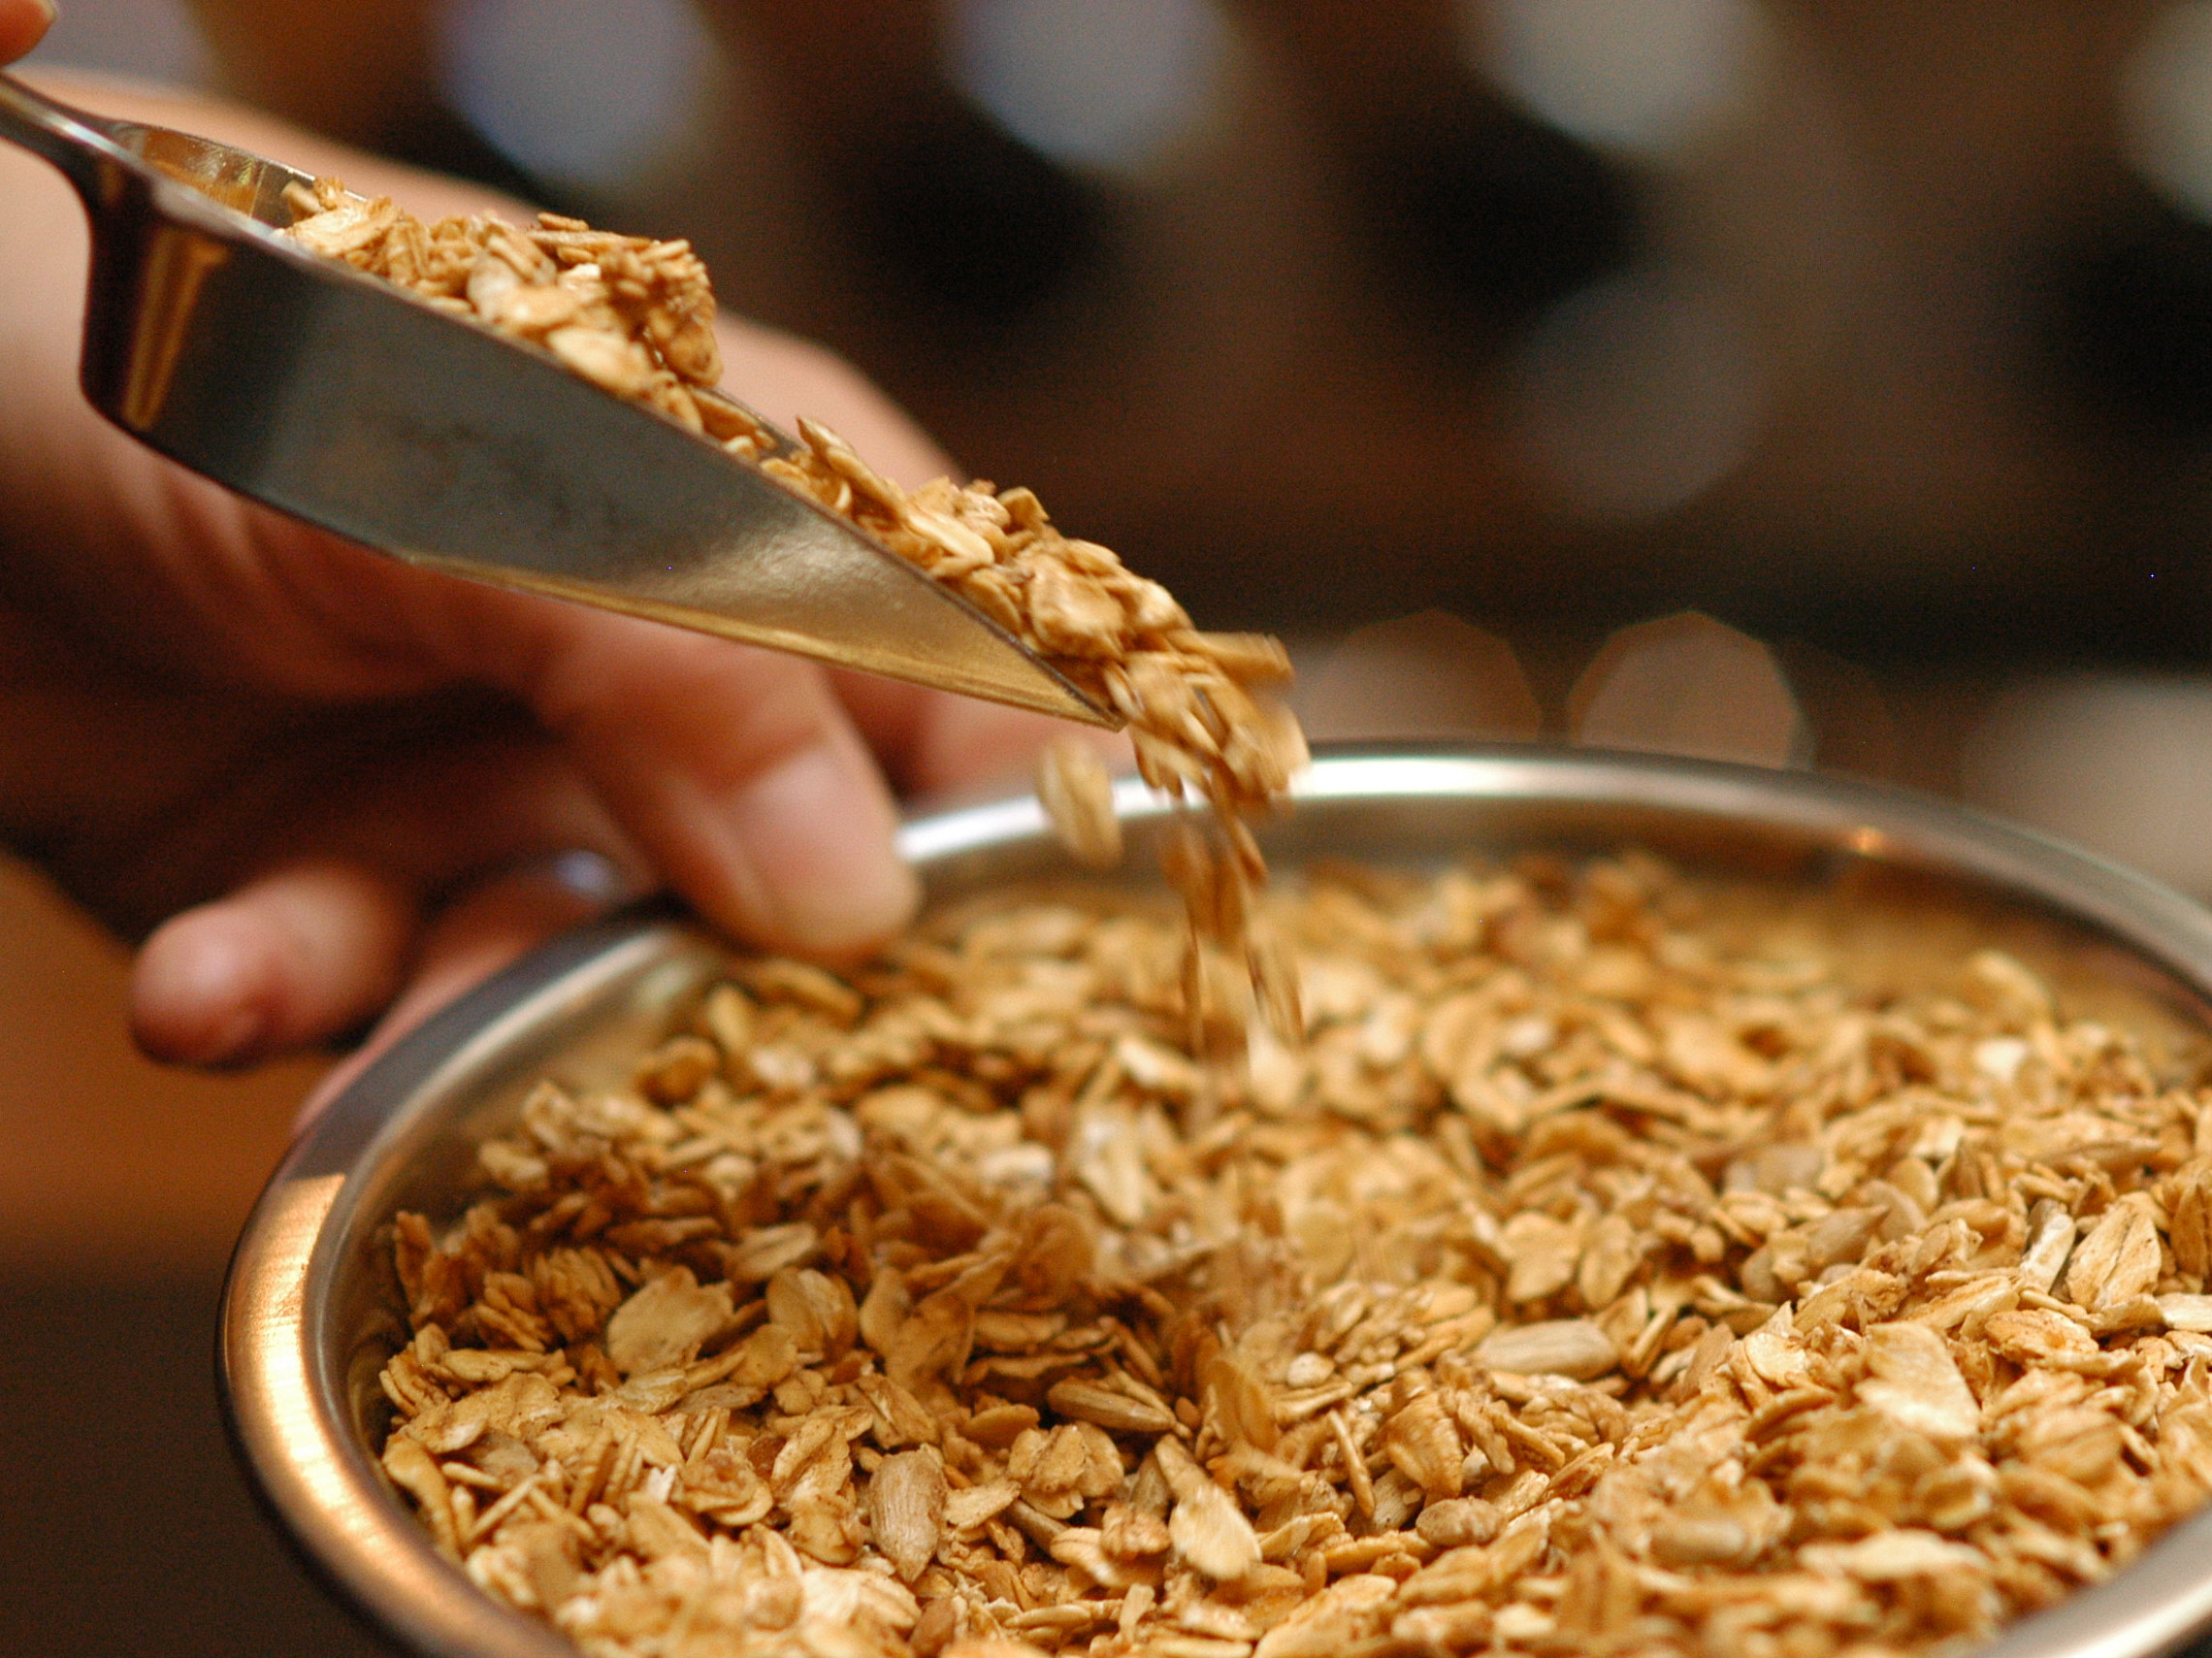 Granola: The “Sometimes” Healthy Snack